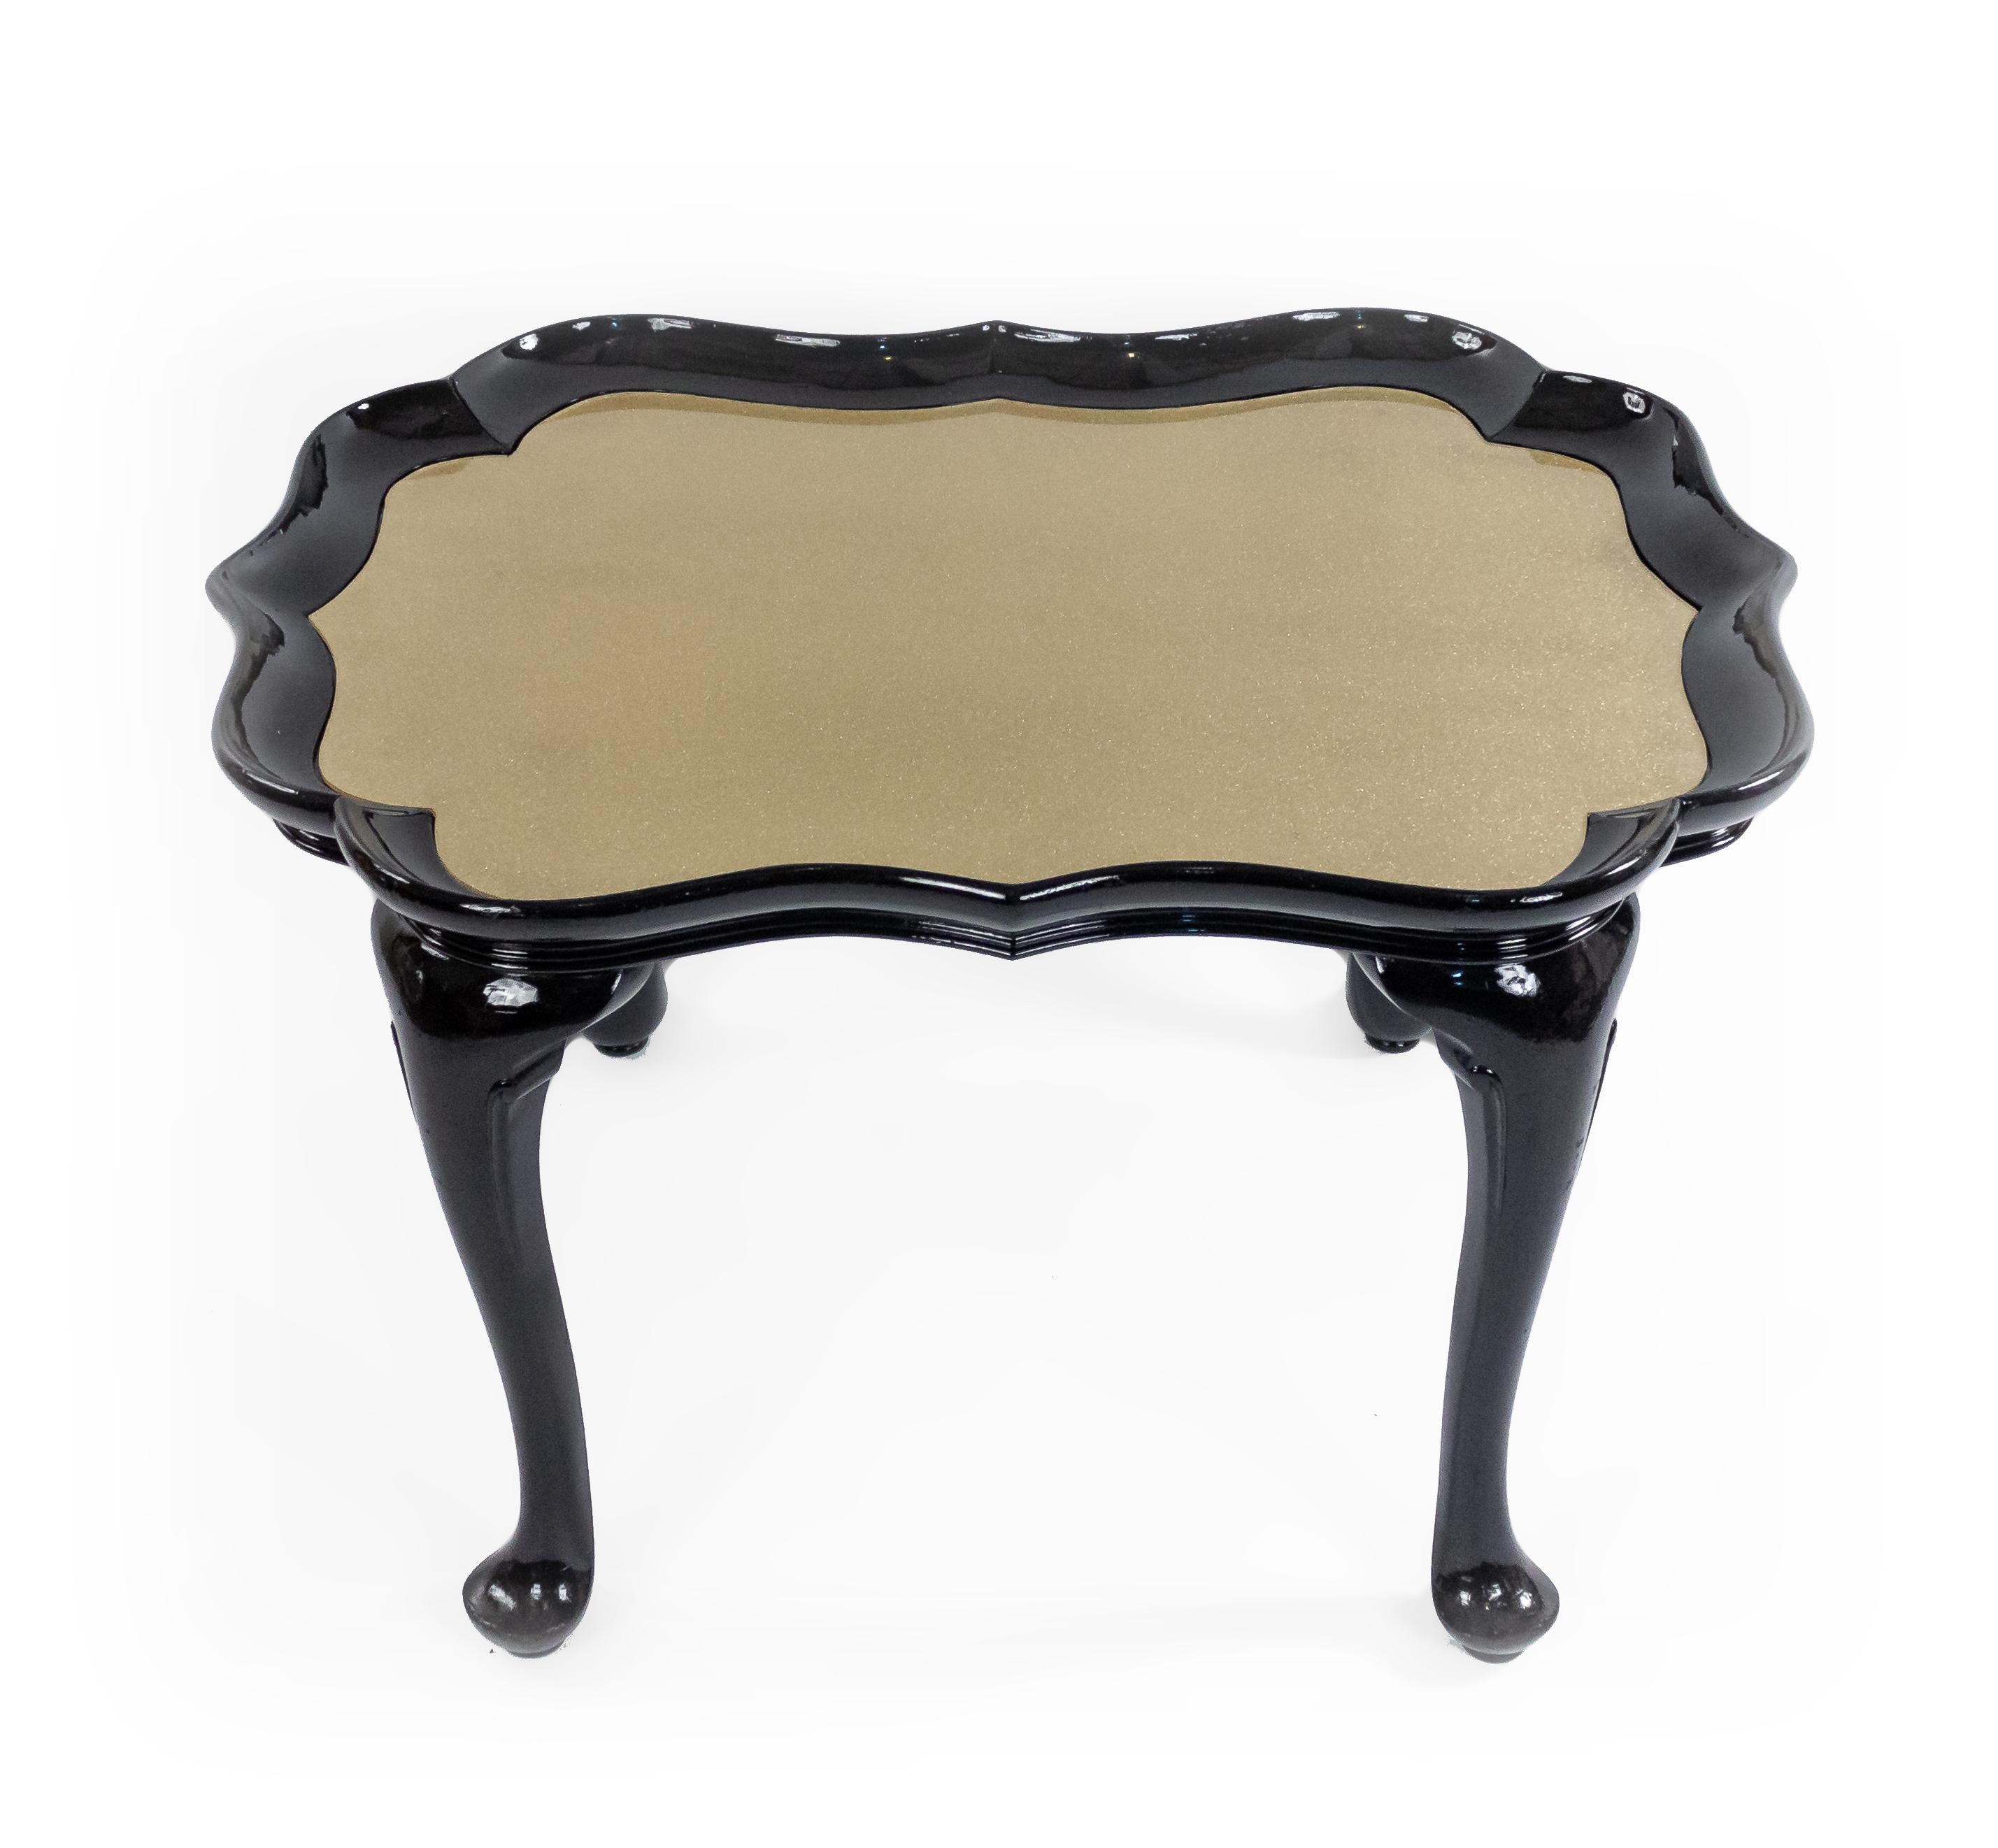 English Victorian-style coffee table with a scalloped gold plexiglass inset top resting in an ebonized Queen Anne-style base.
